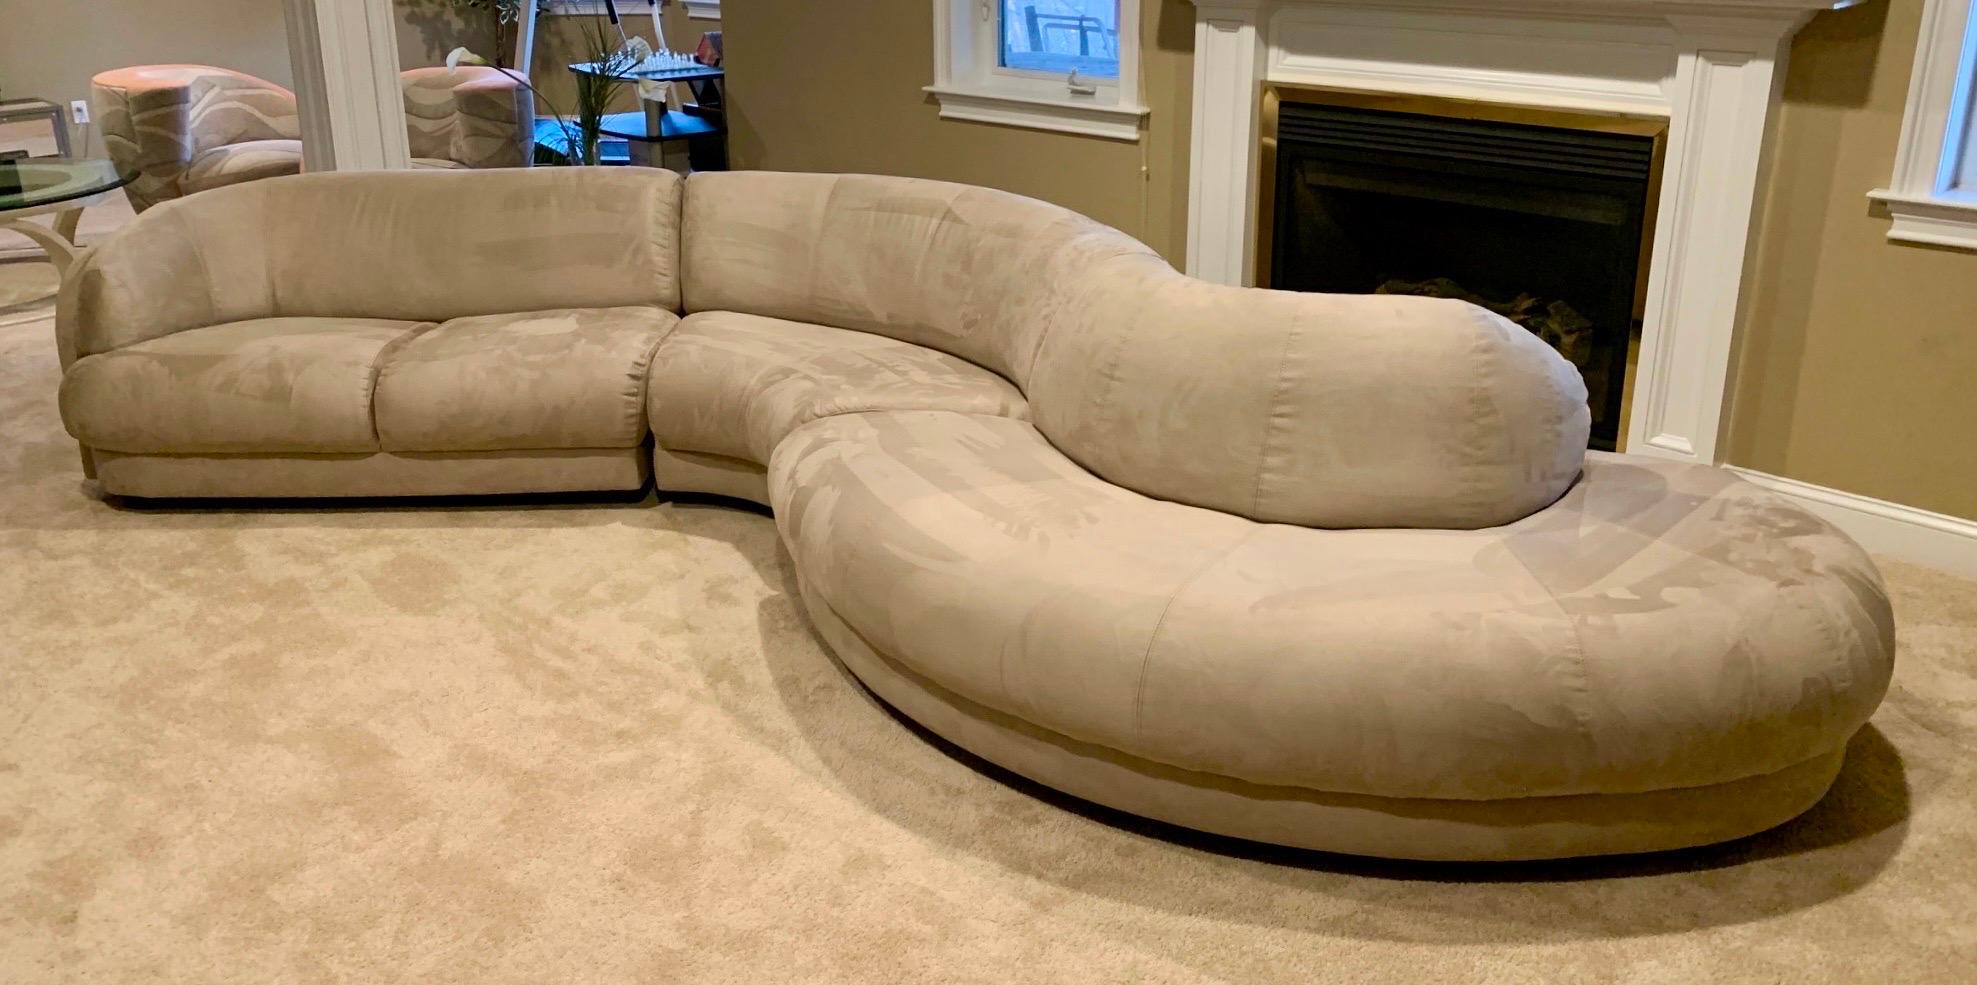 Monumental serpentine snake sectional sofa in the style of Vladimir Kagan and Milo Baughman. This unique modular curved sofa consists of three interlocking sections which have been professionally reupholstered in a neutral taupe tone Ultrasuede by